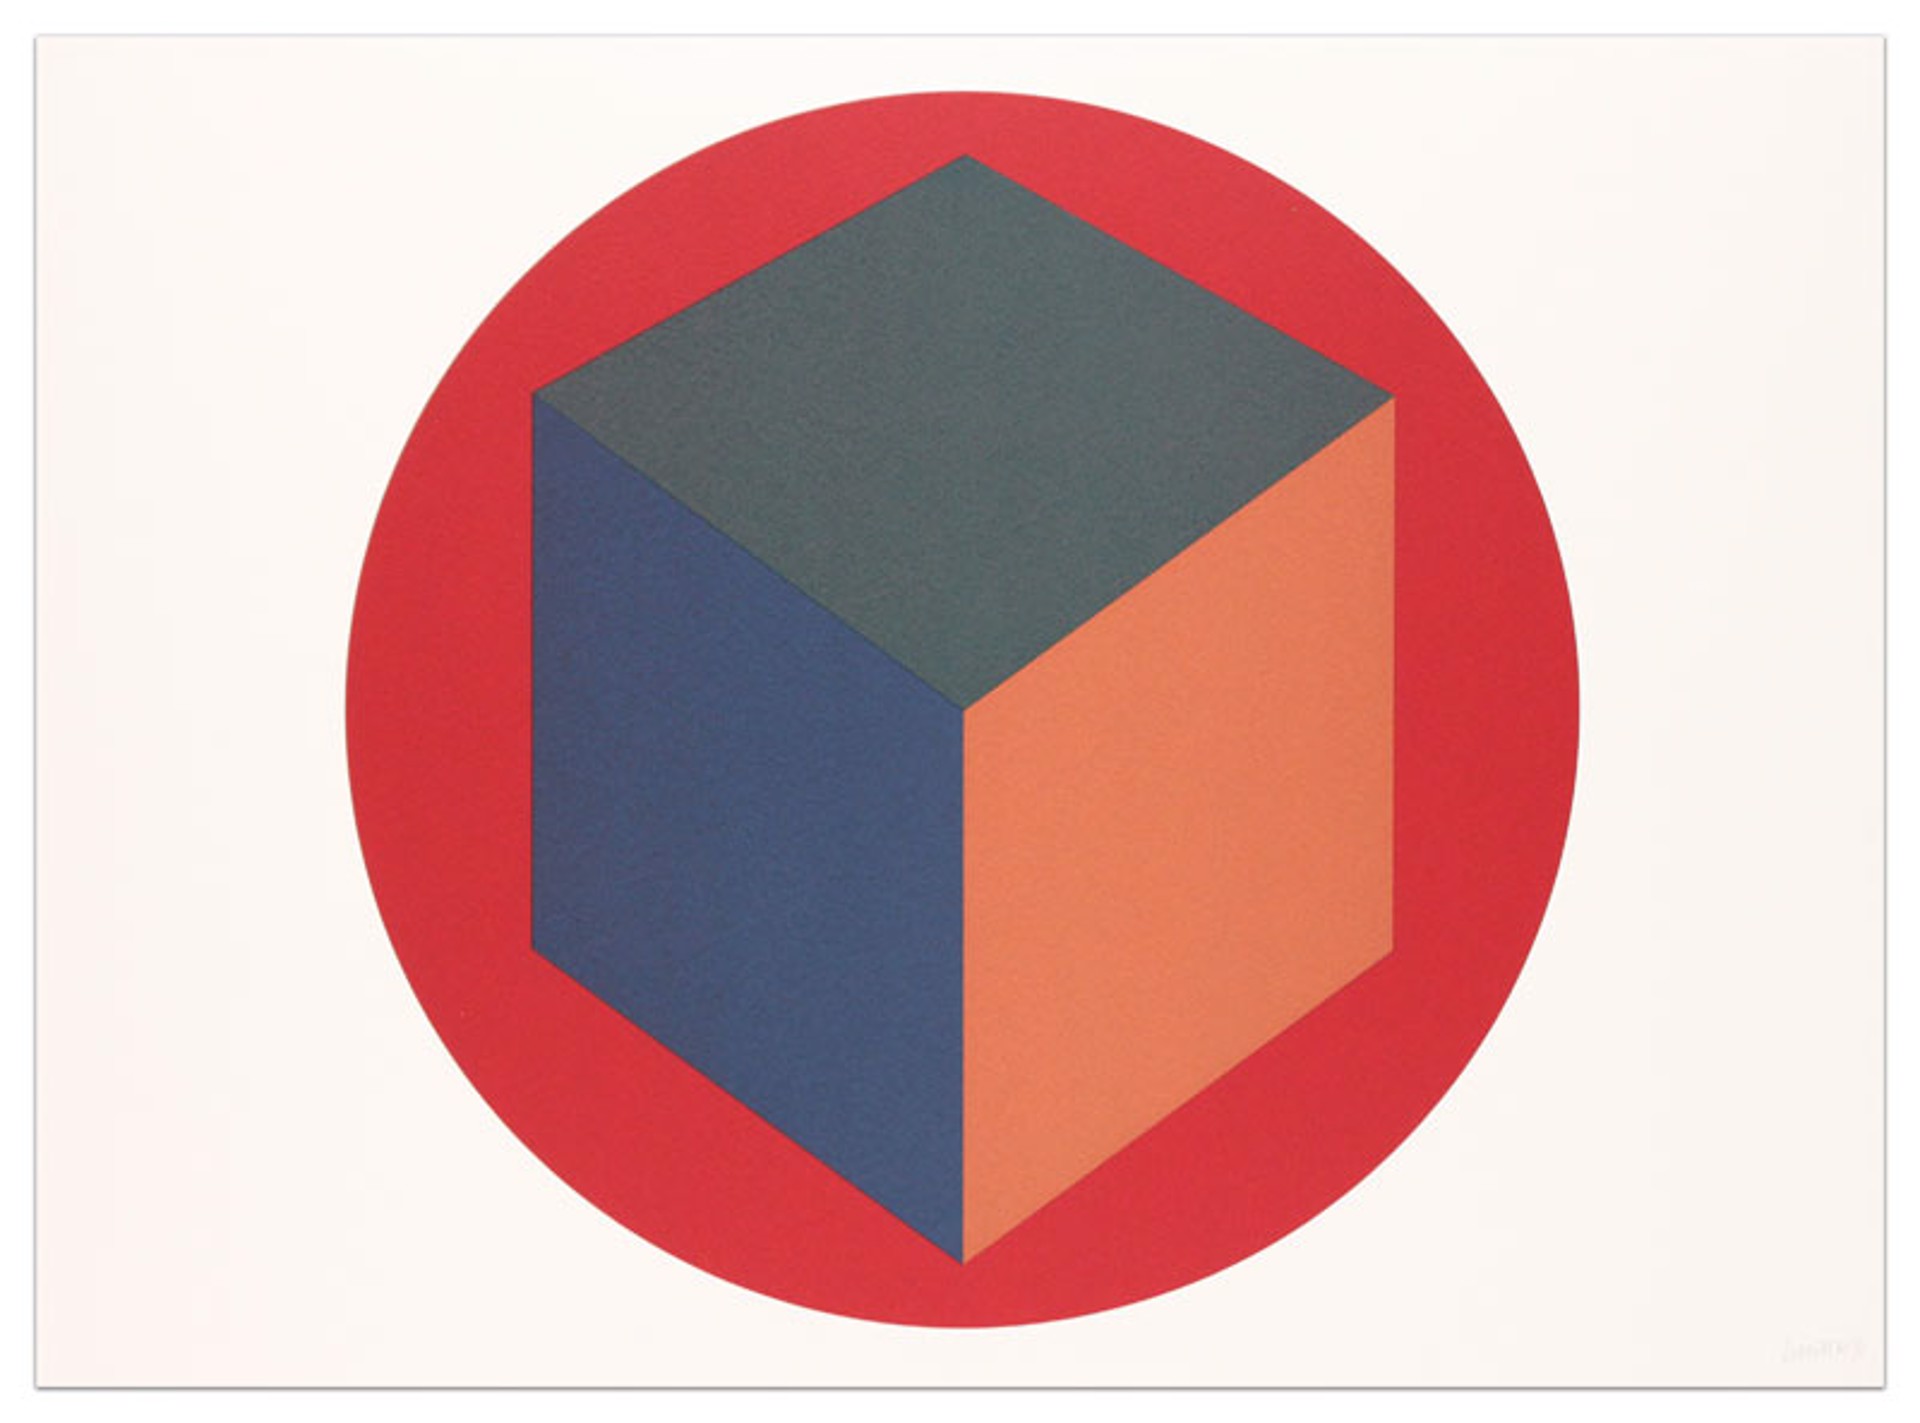 Centered Cube within a Red Circle by Sol LeWitt